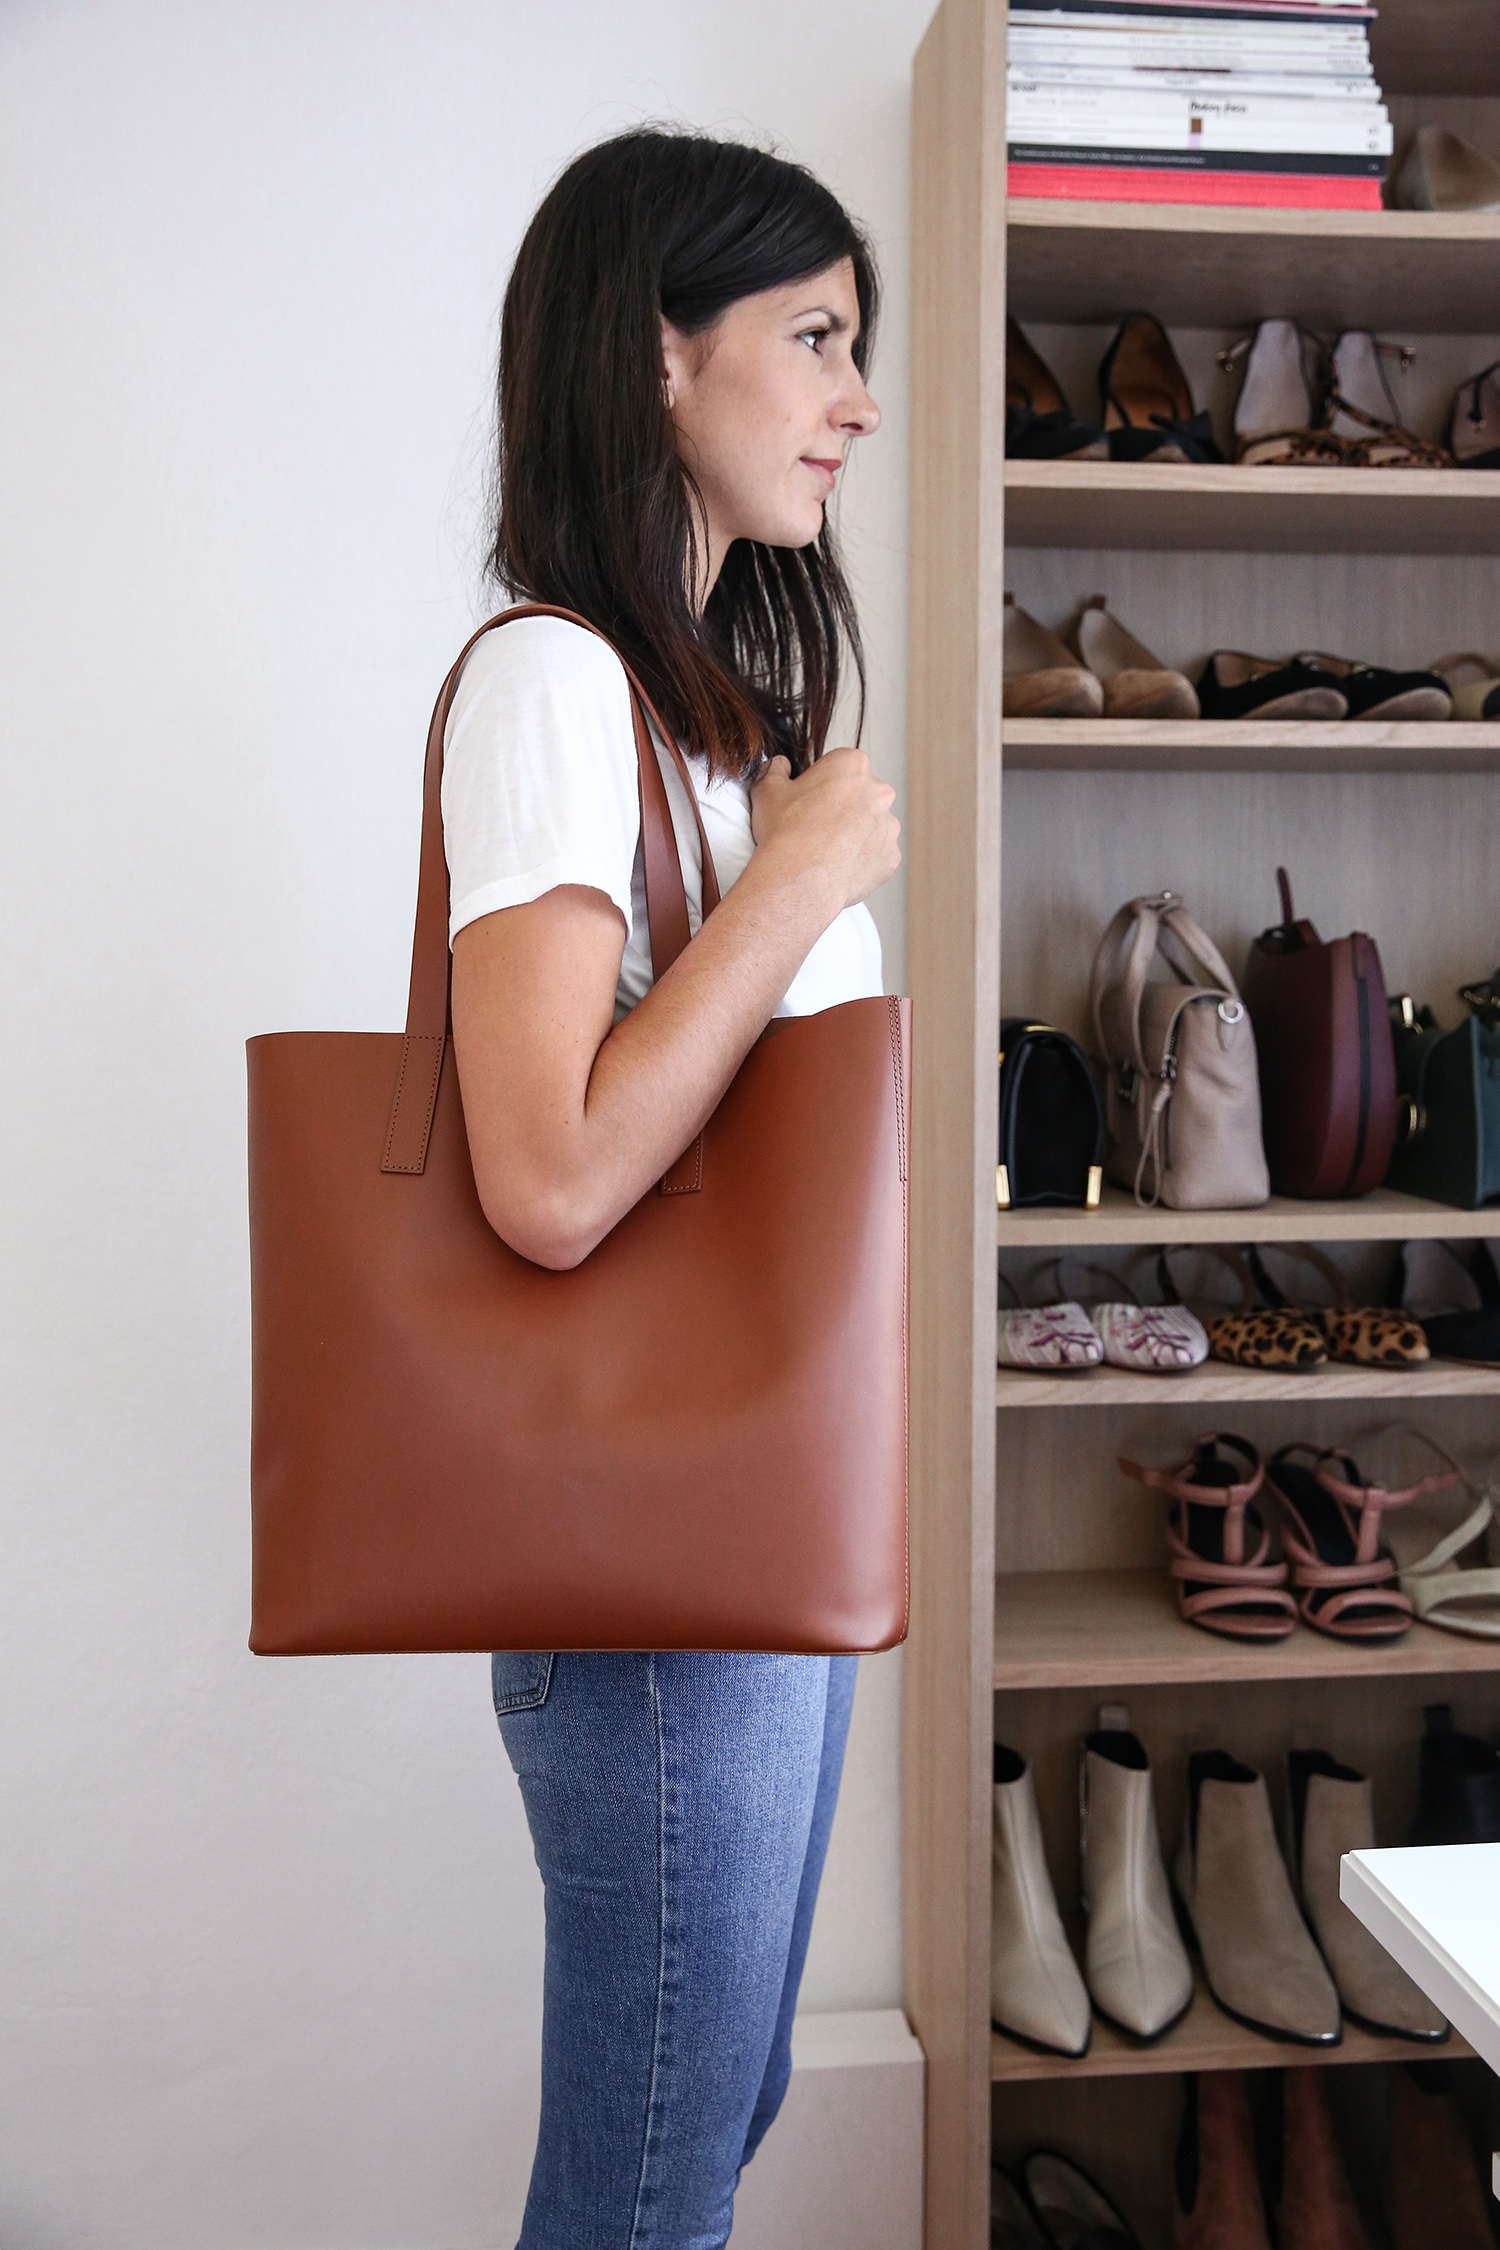 The Everlane Day Market Tote Comes in 4 New Colors